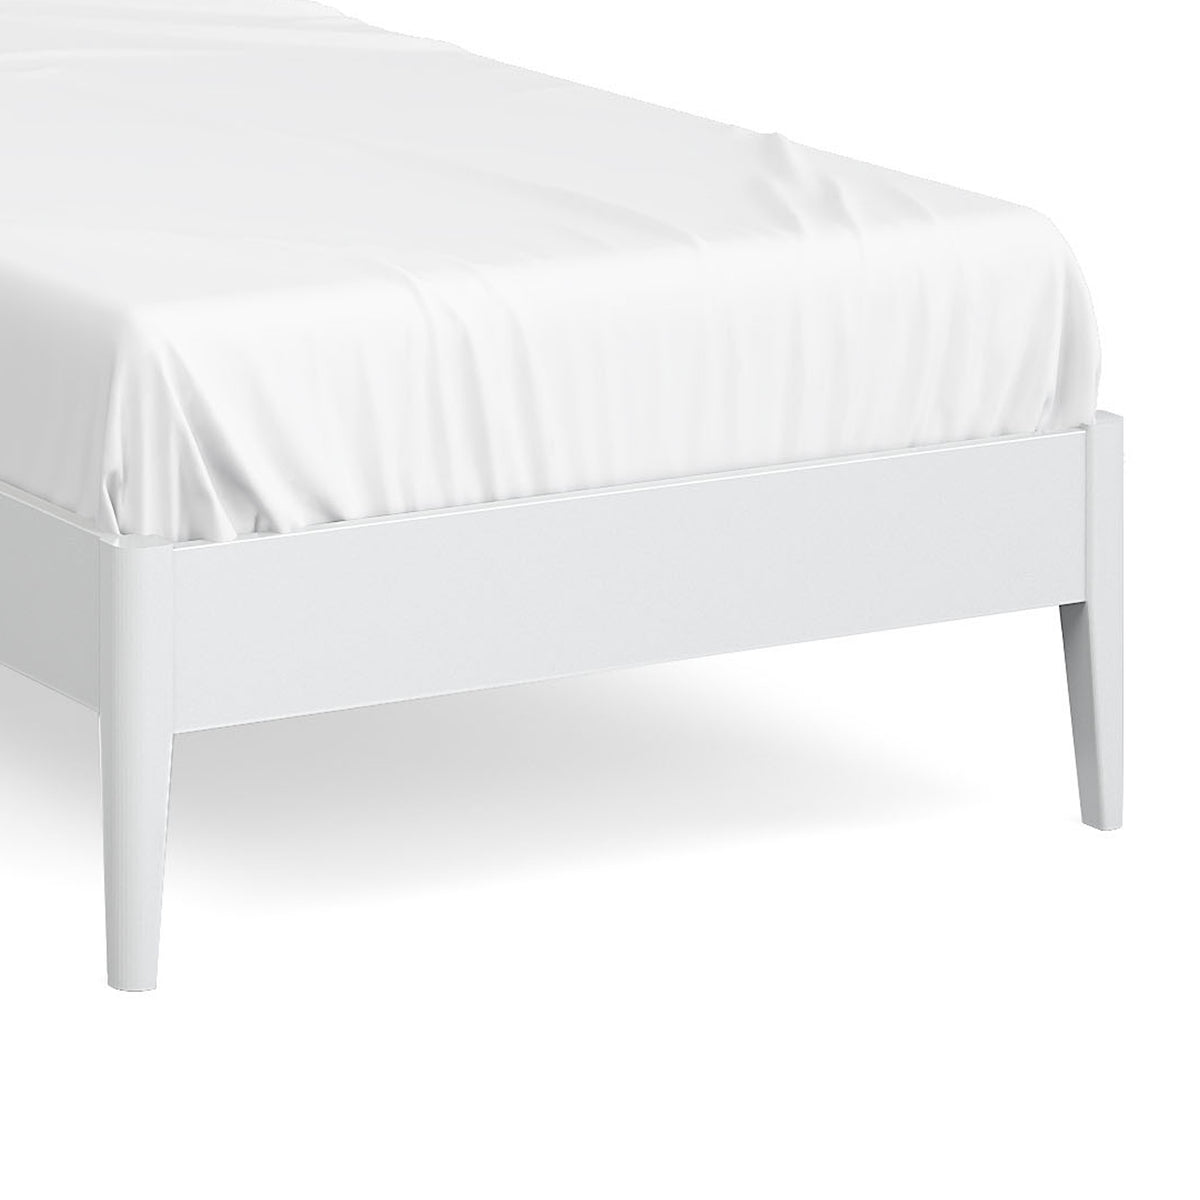 Chest White Painted 3ft Single Bed Frame - Close up of footer